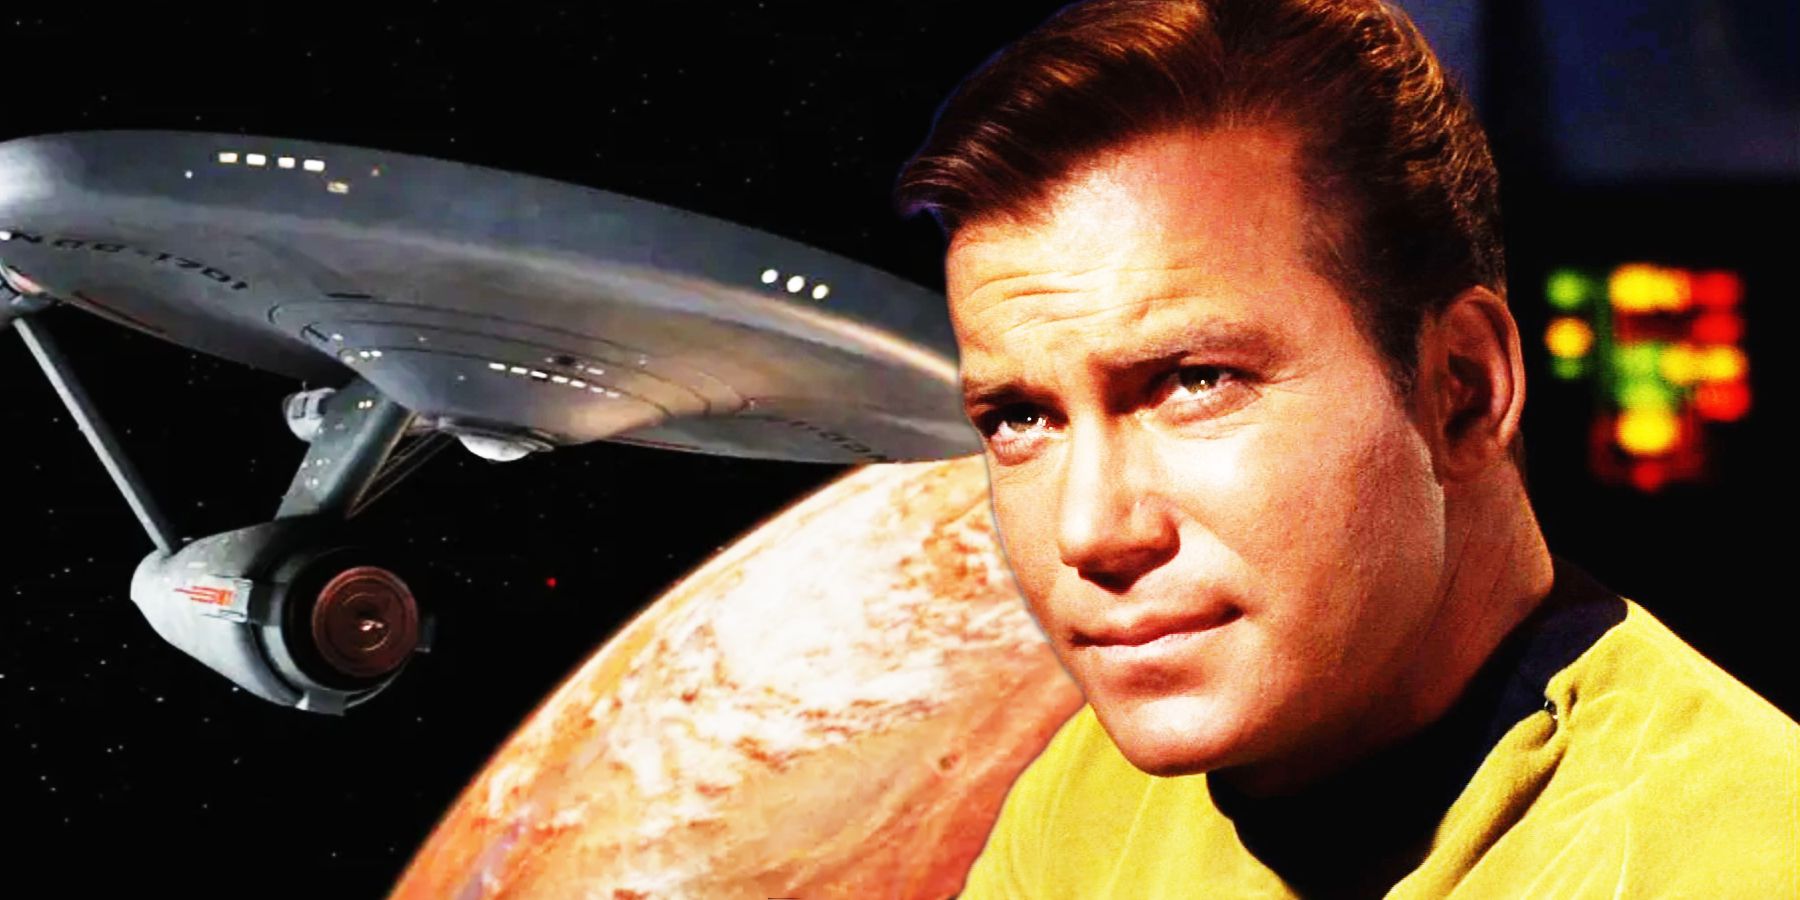 The USS Enterprise in orbit above a planet, with Captain James T Kirk at the bridge